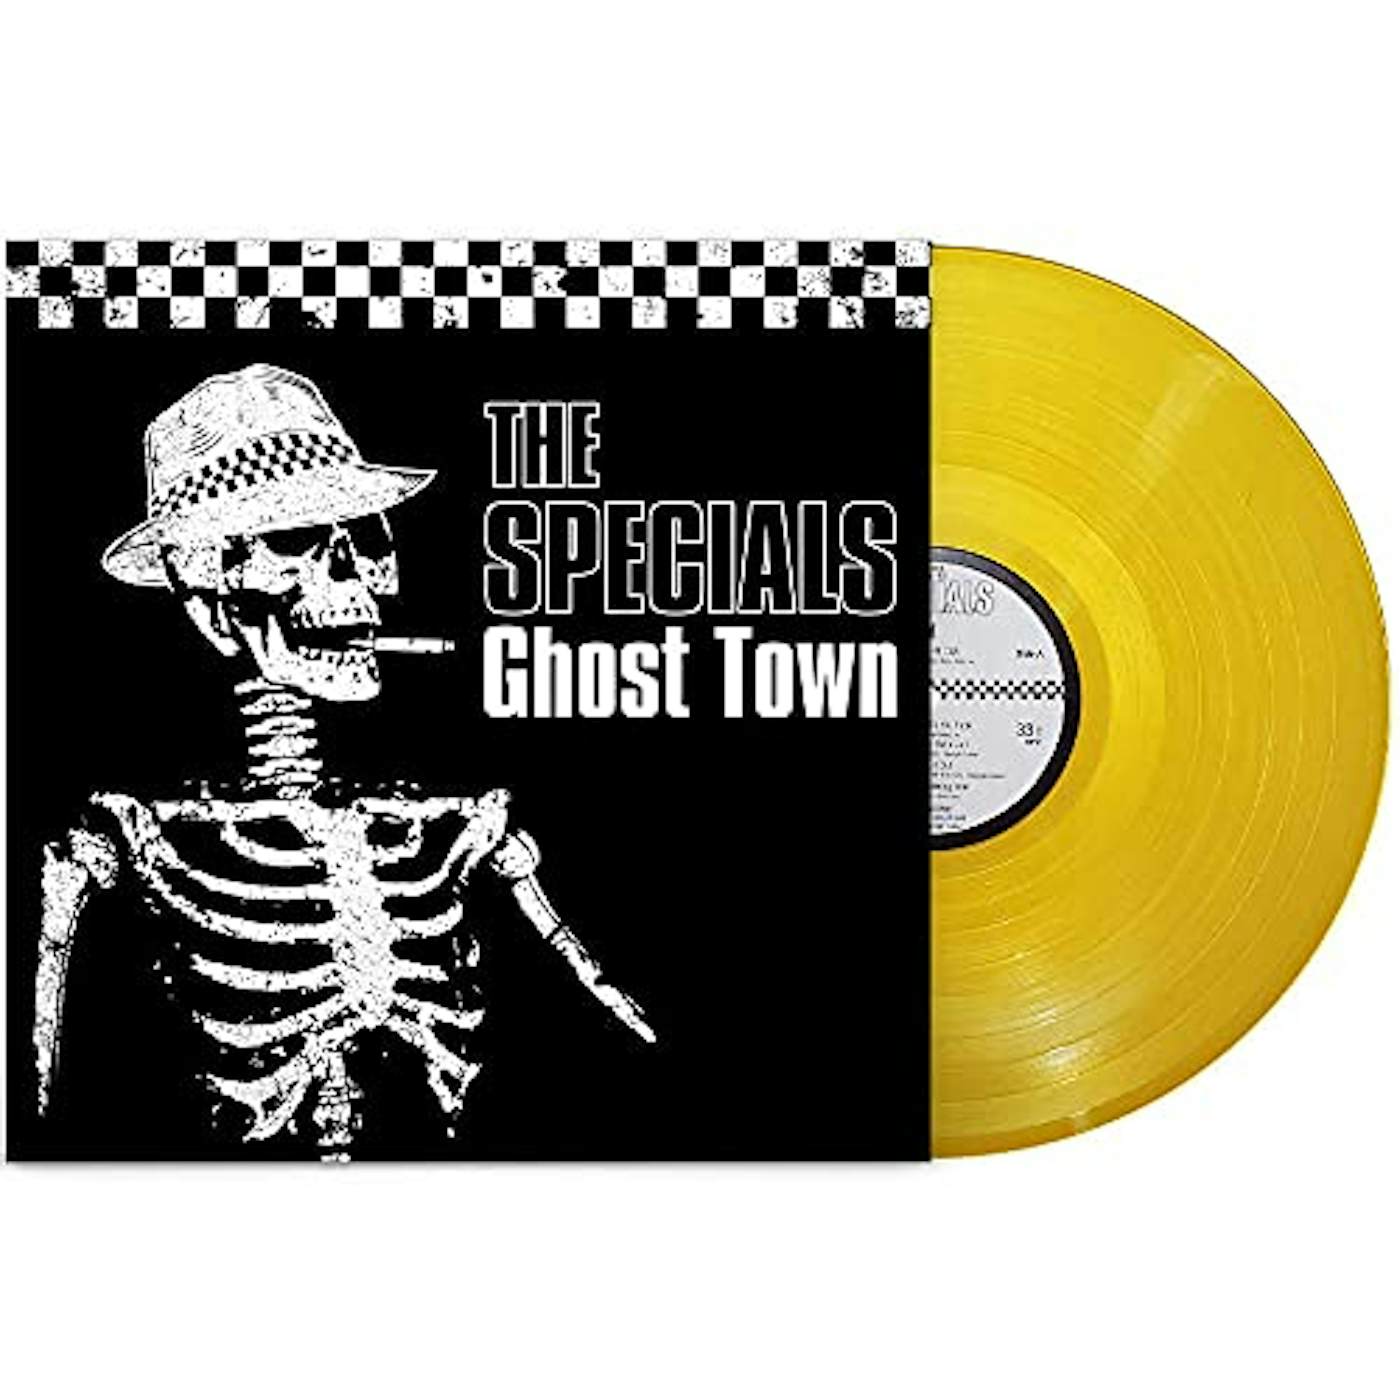 The Specials GHOST TOWN (YELLOW VINYL) Vinyl Record